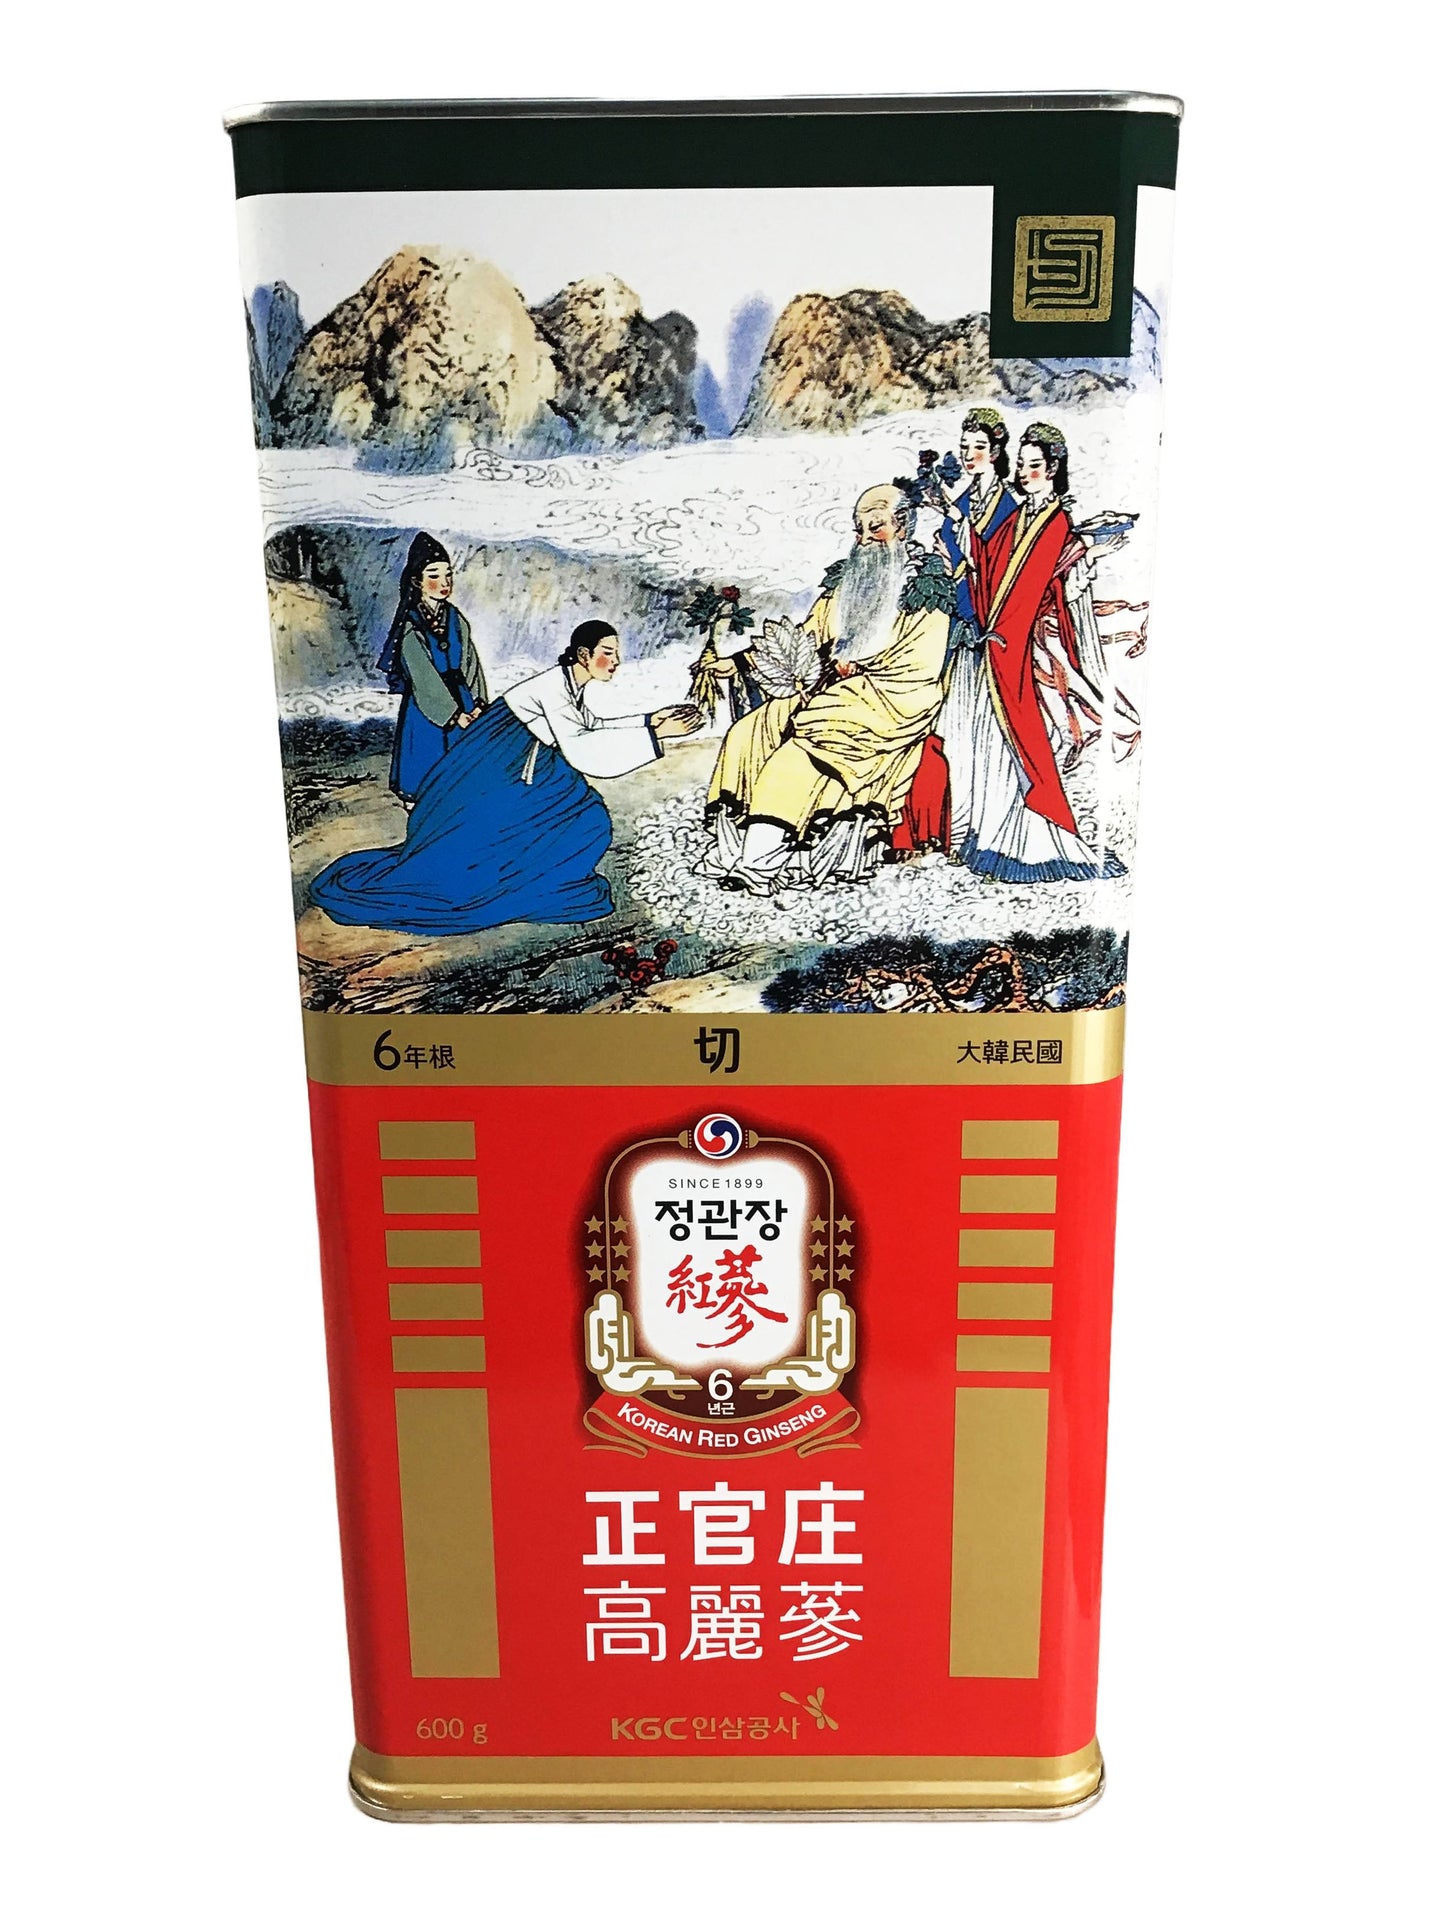 CHEONG KWAN JANG 6 Year Old Korean Red Ginseng Canned 600g Roots (Cut) 正官庄 高丽参切参